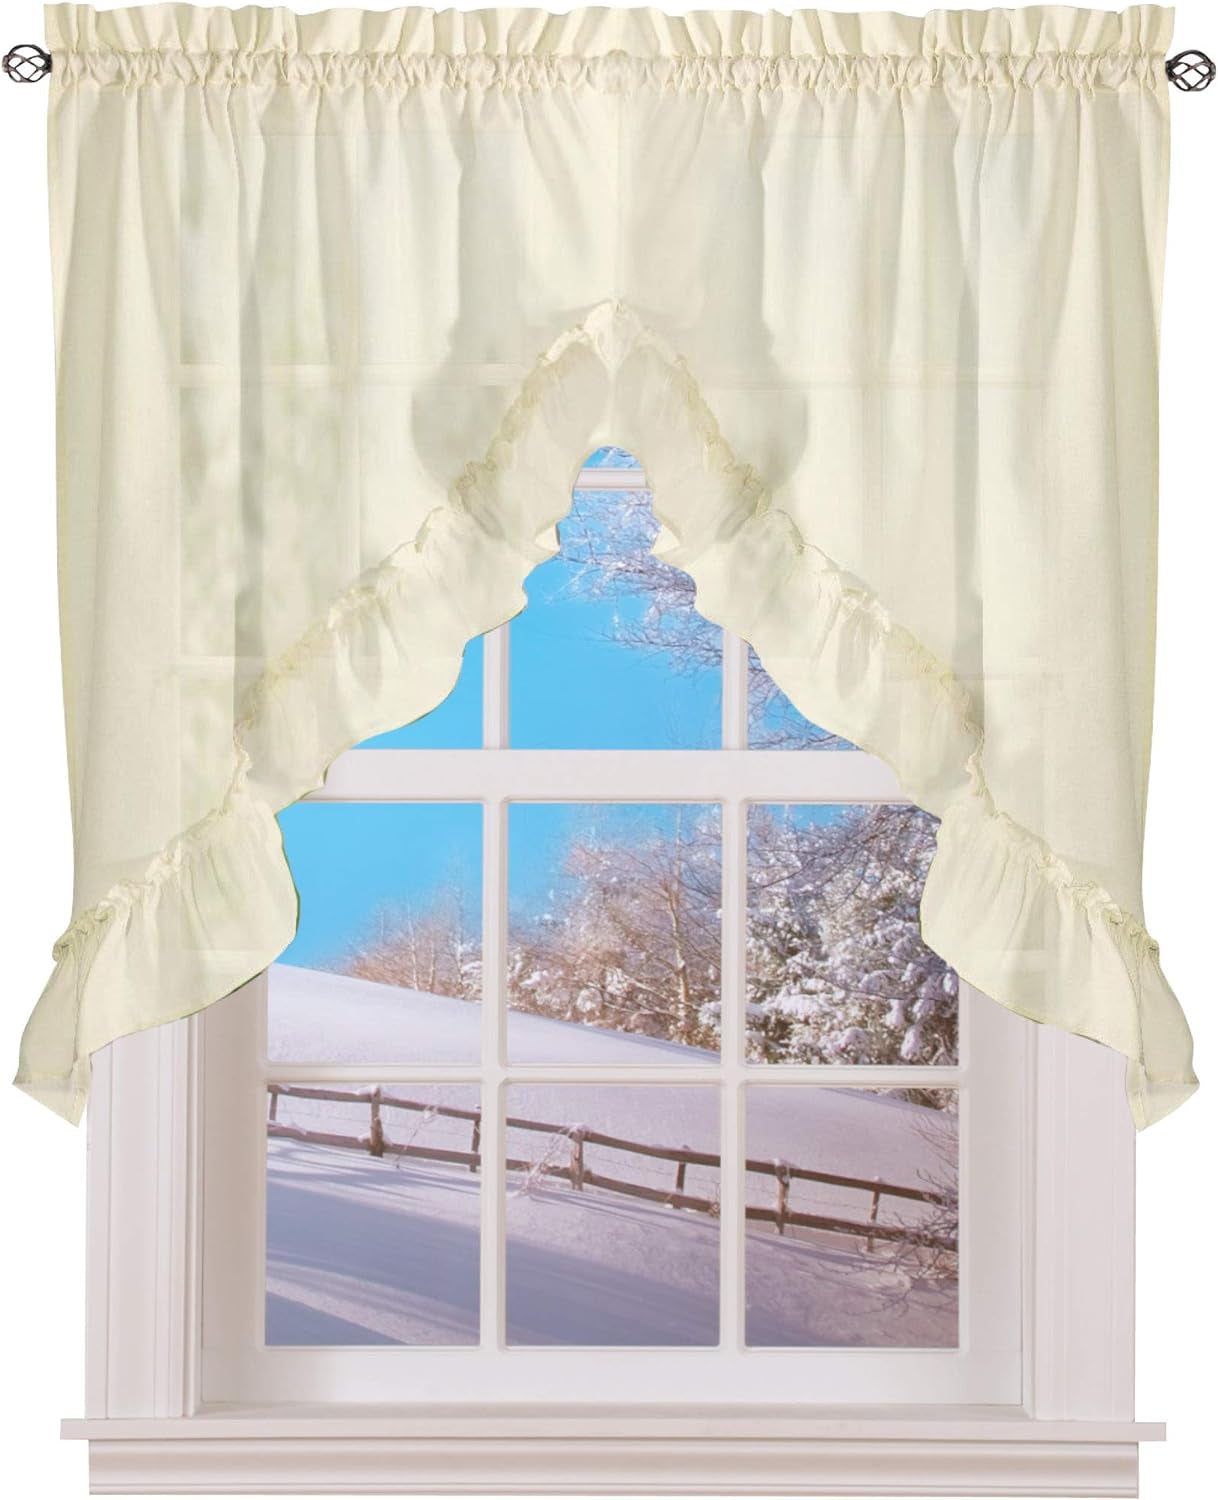 Ellis Curtain Stacey Ruffled Swag Curtains - 38X60, Rod-Pocket Top - ICE Cream